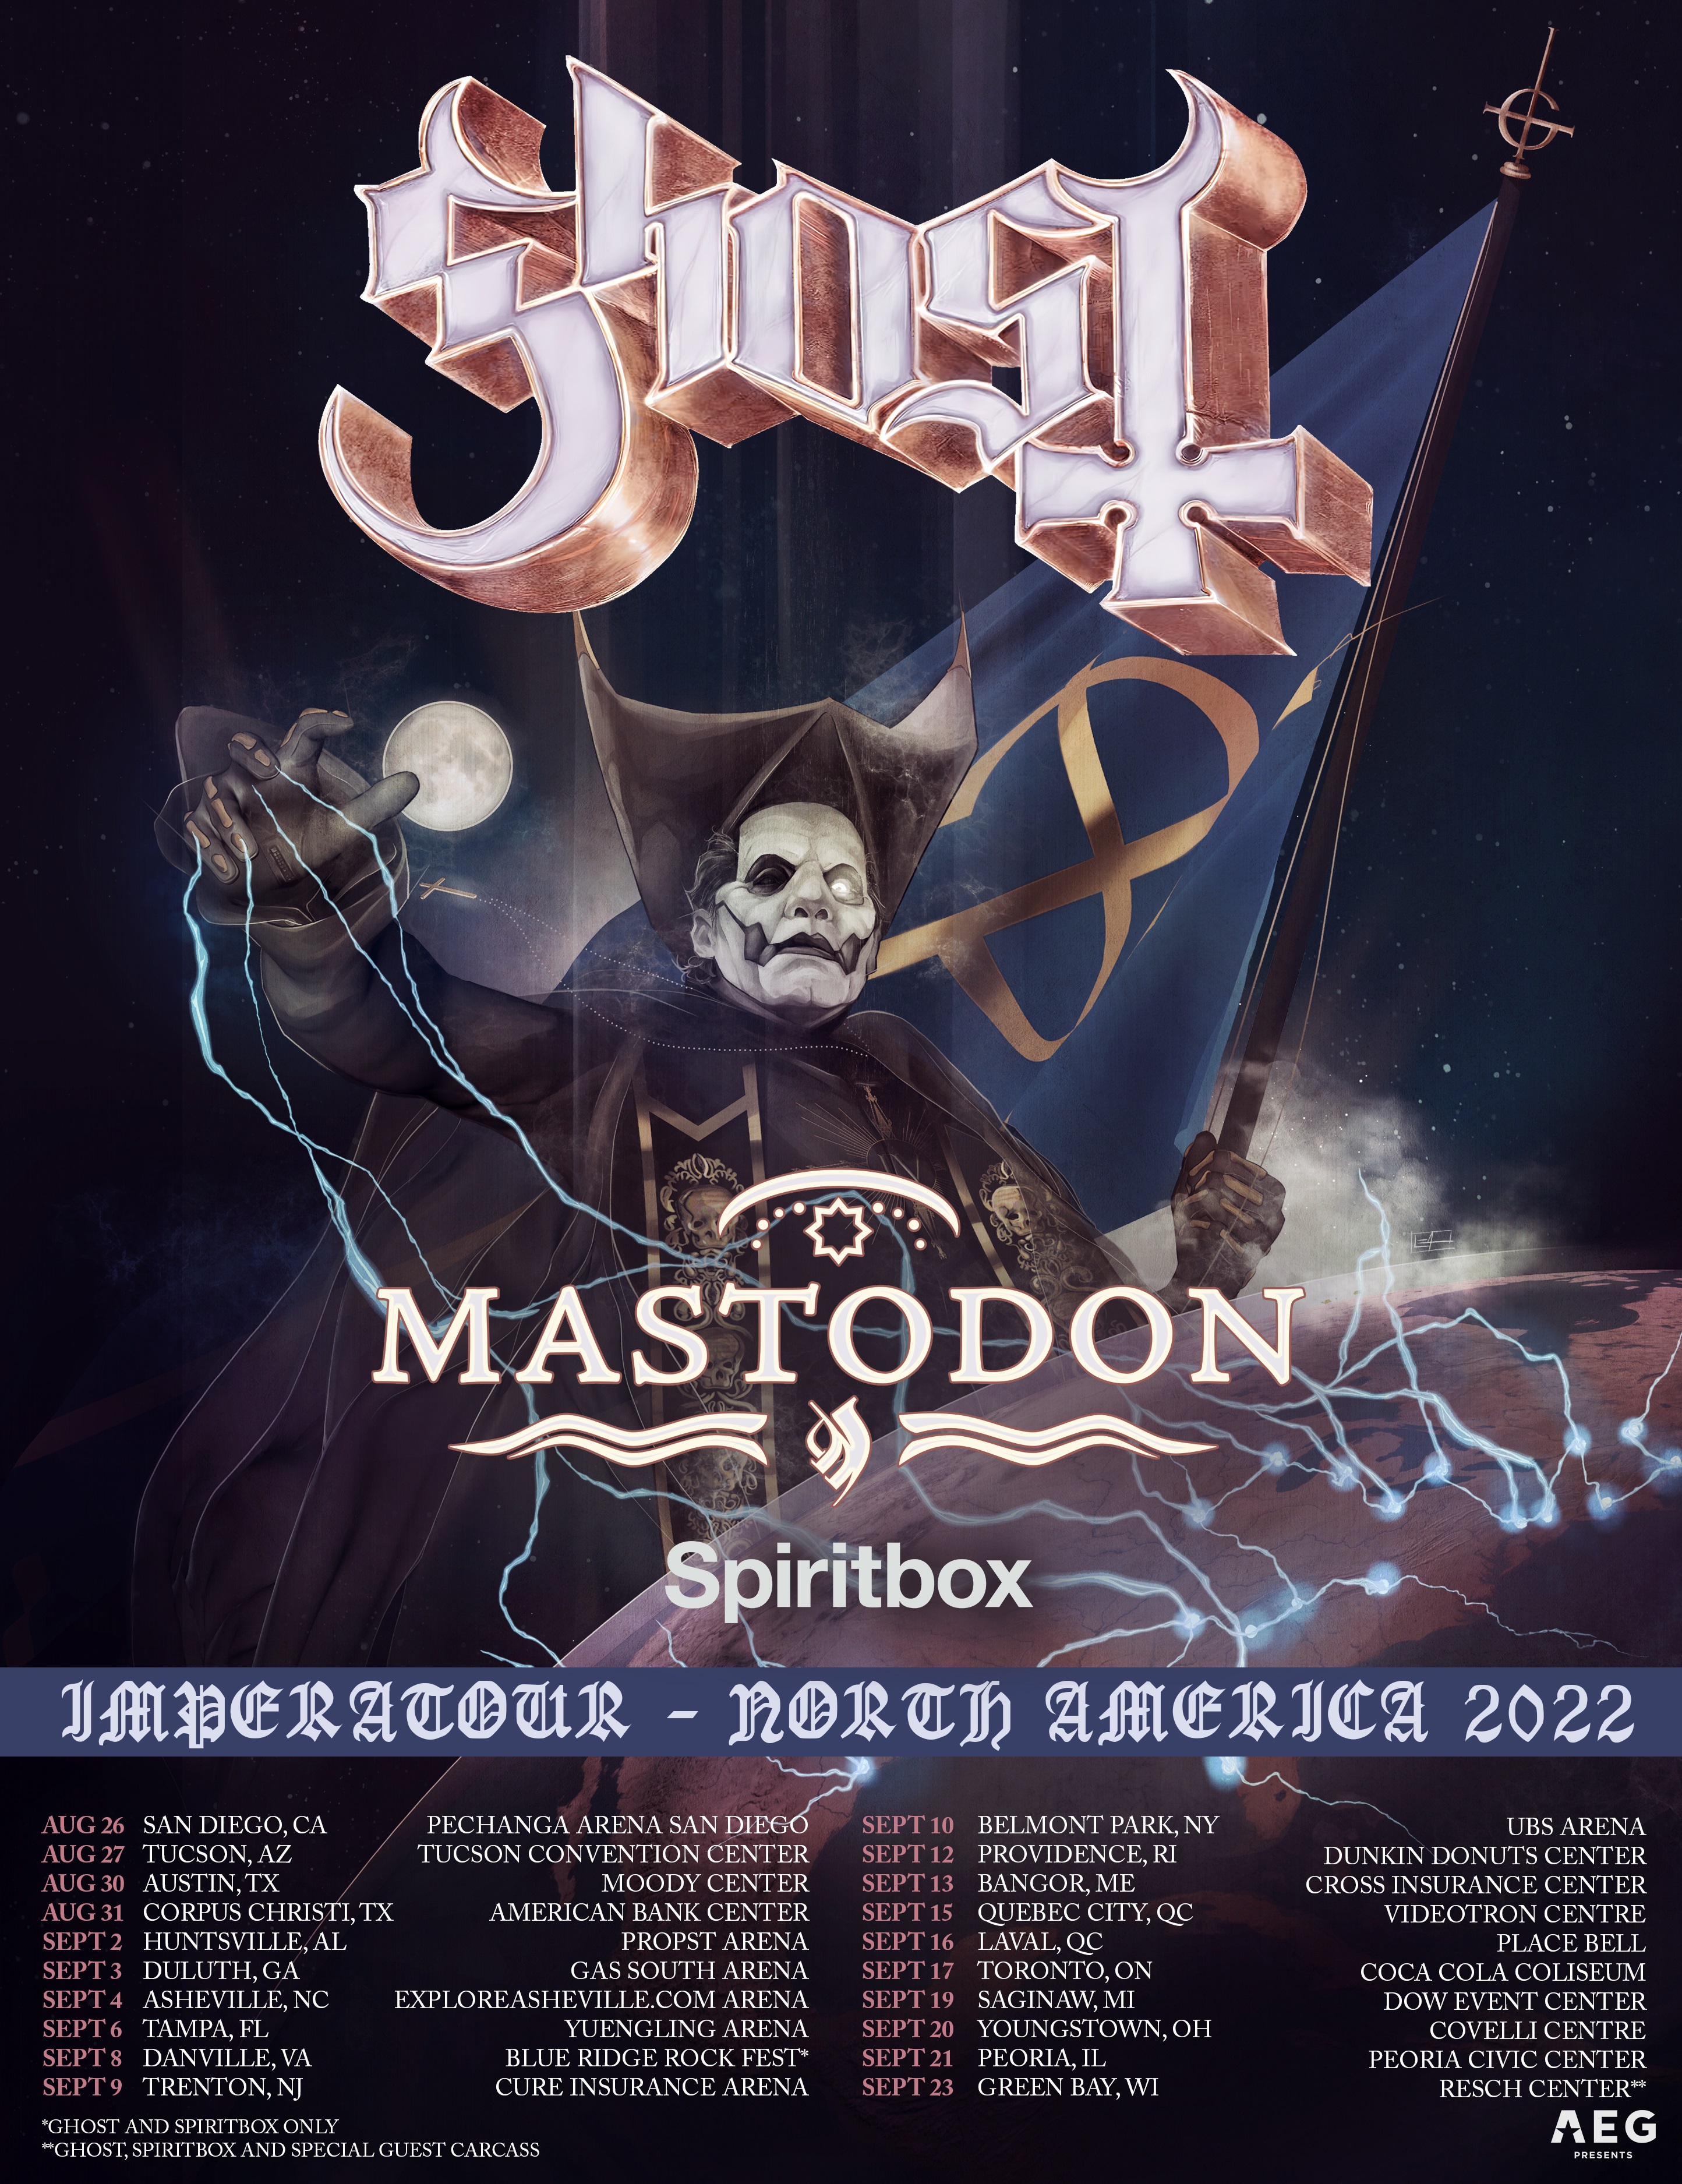 We’re hitting the road with GHOST and Spiritbox this fall!!! Tickets on Sale this Friday at 10 am local time at MastodonRocks.Com/Tour